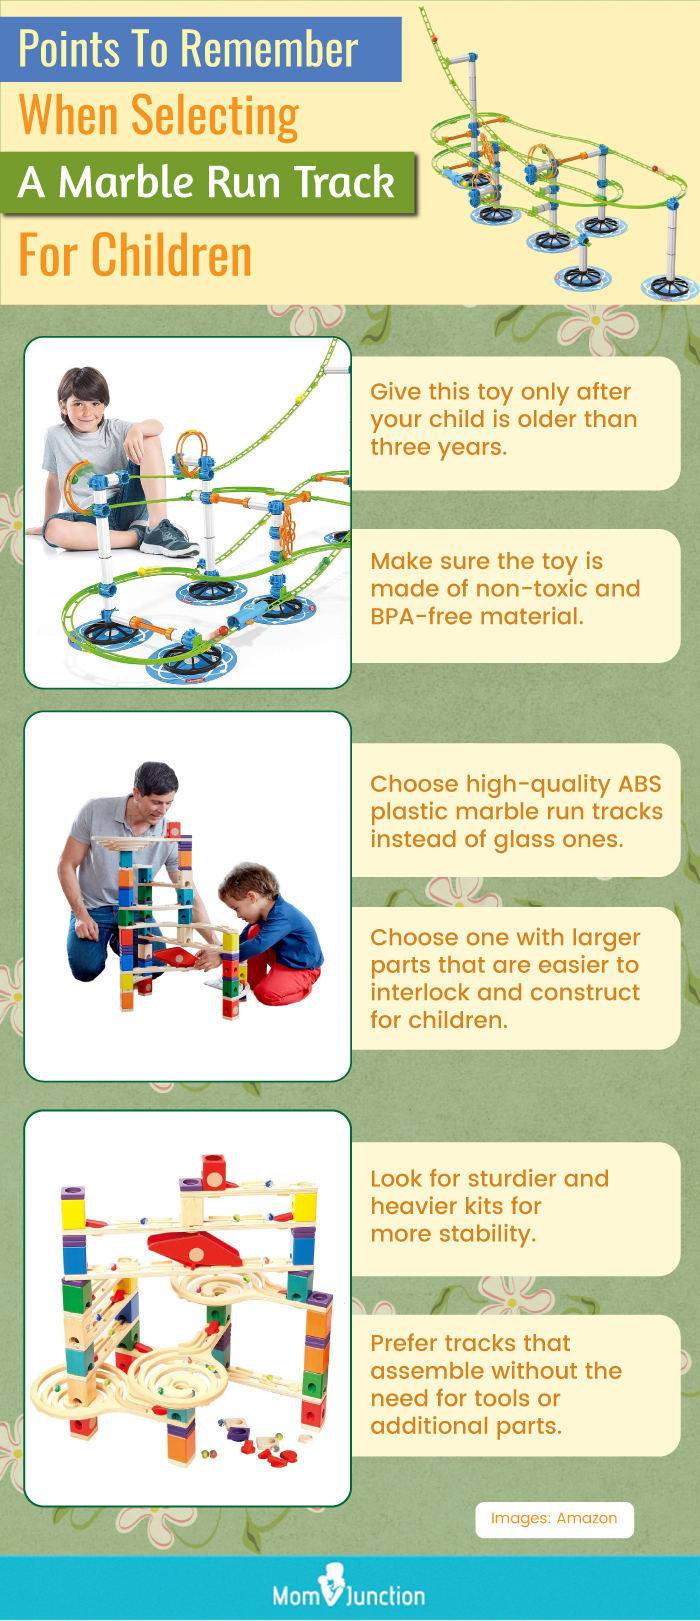 Points To Remember When Selecting A Marble Run Track For Children (infographic)